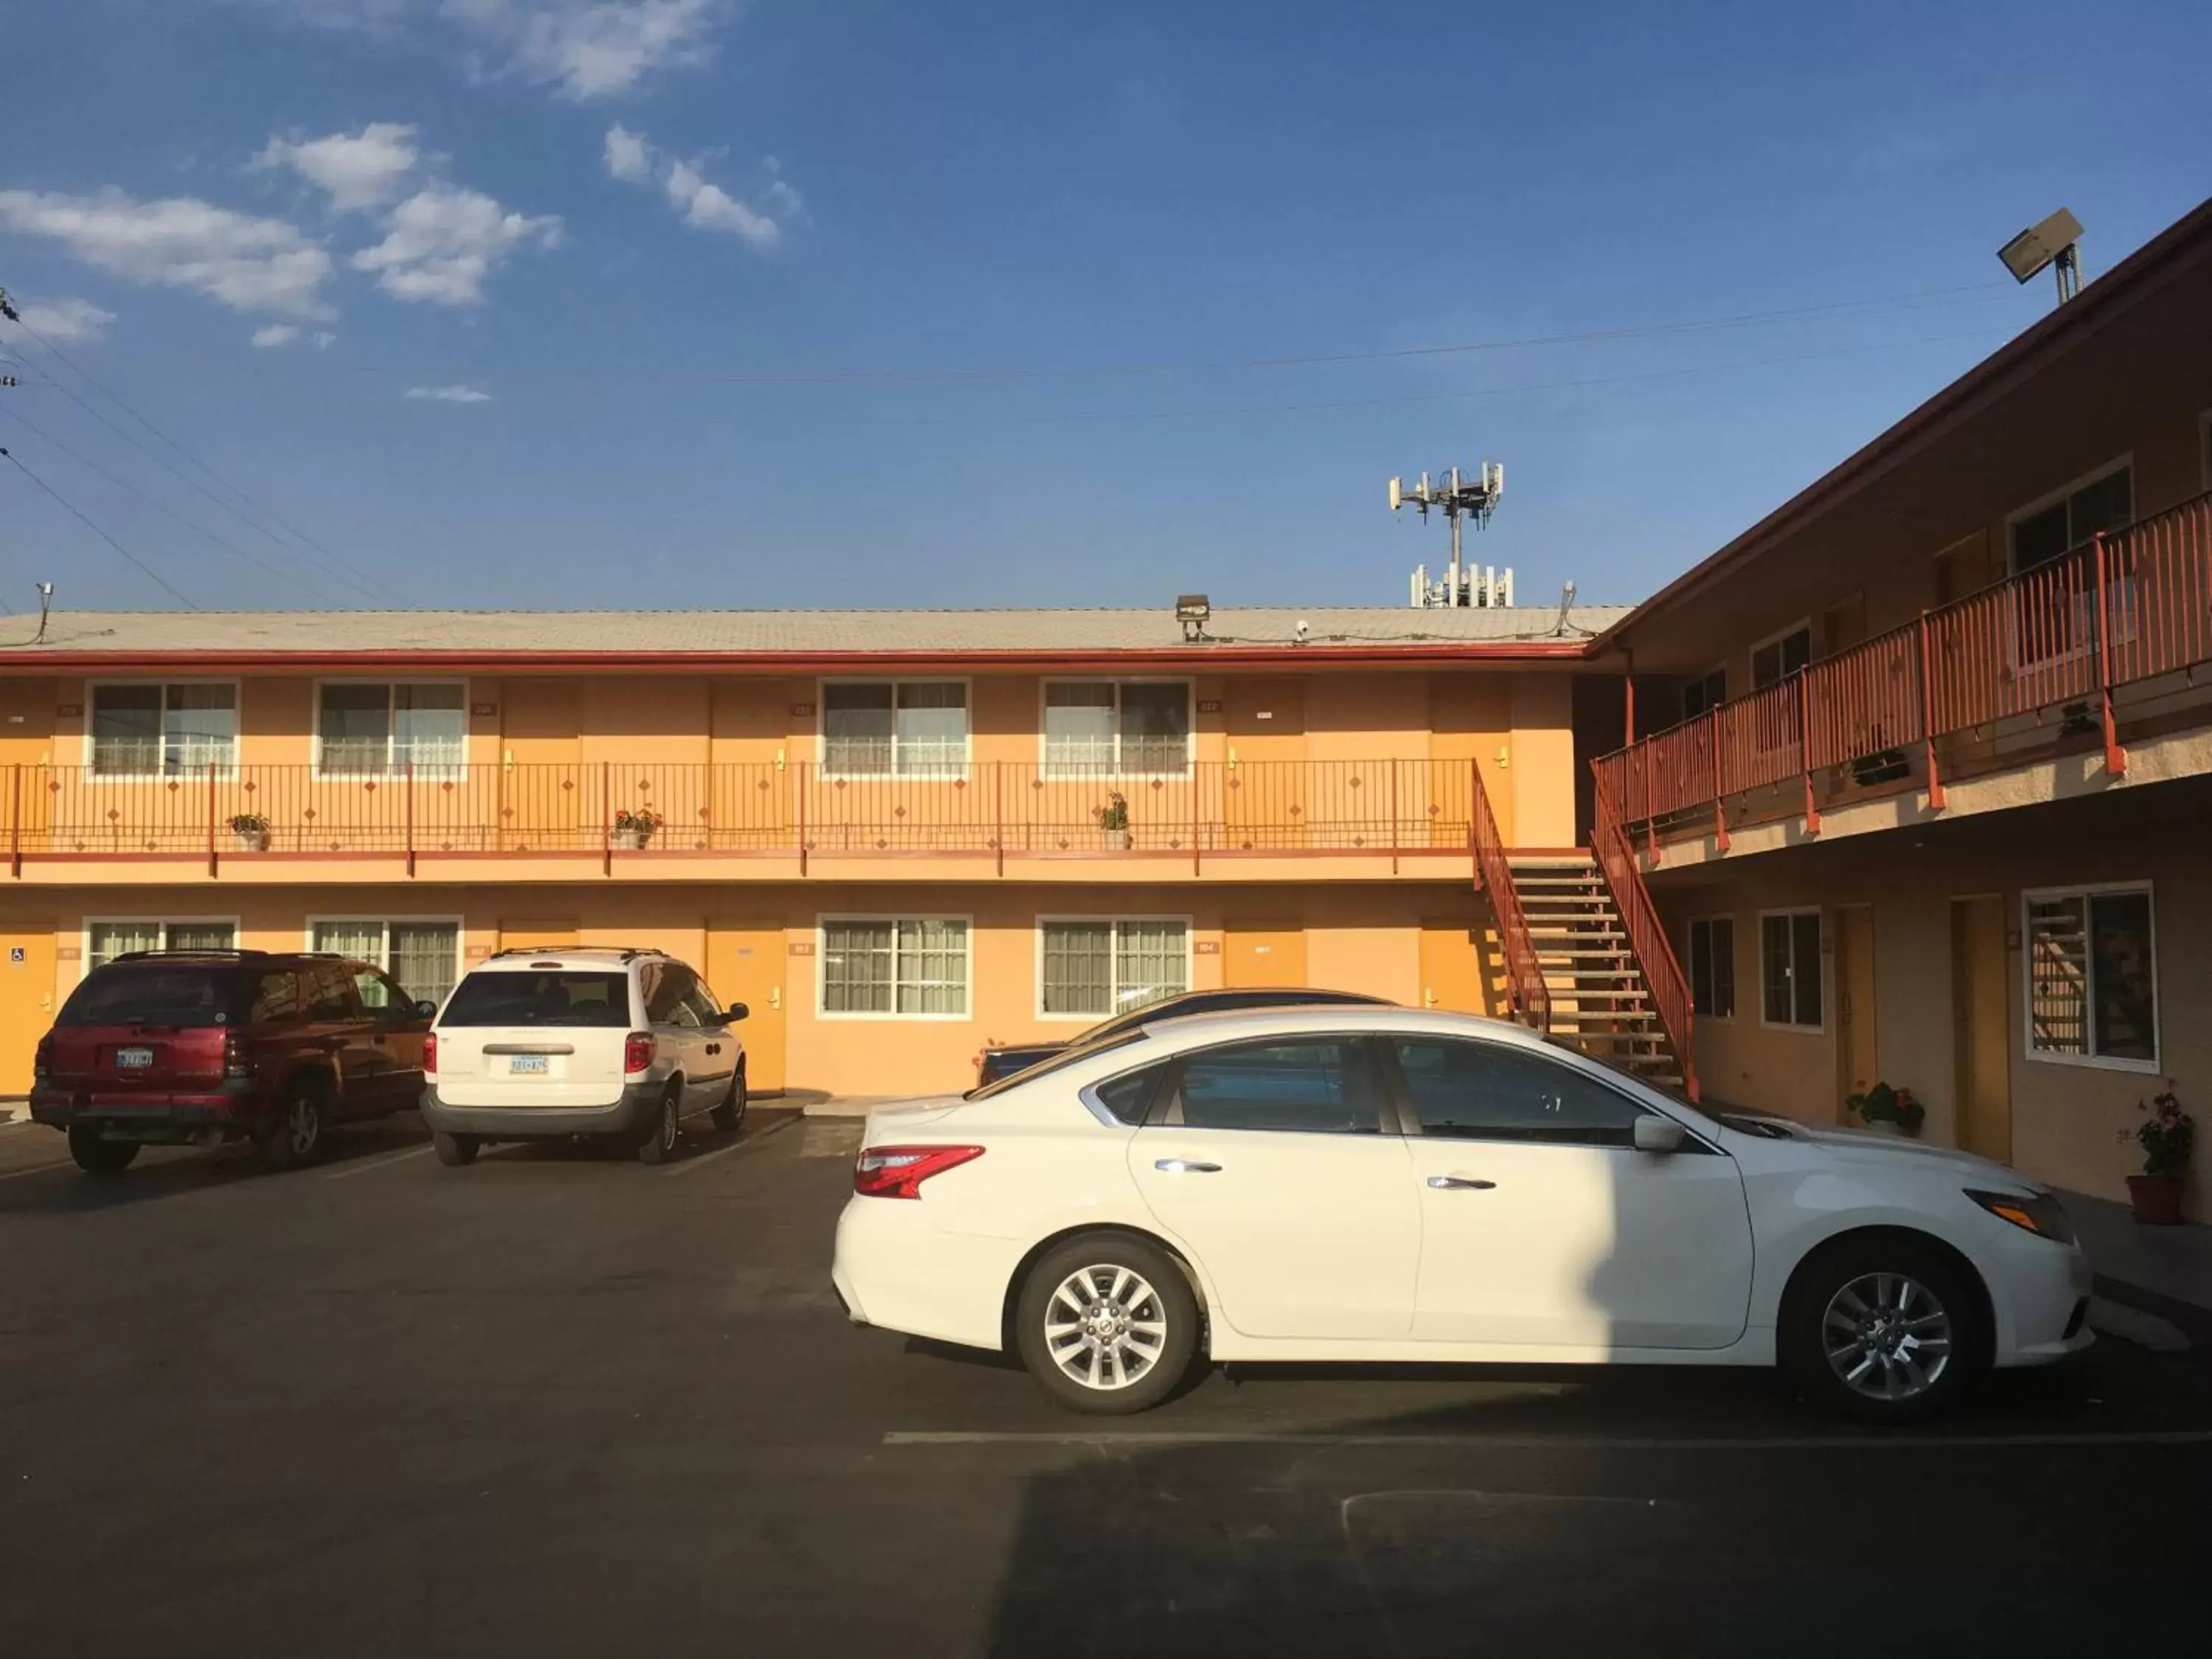 Property Building in Americas Best Value Inn Beaumont California